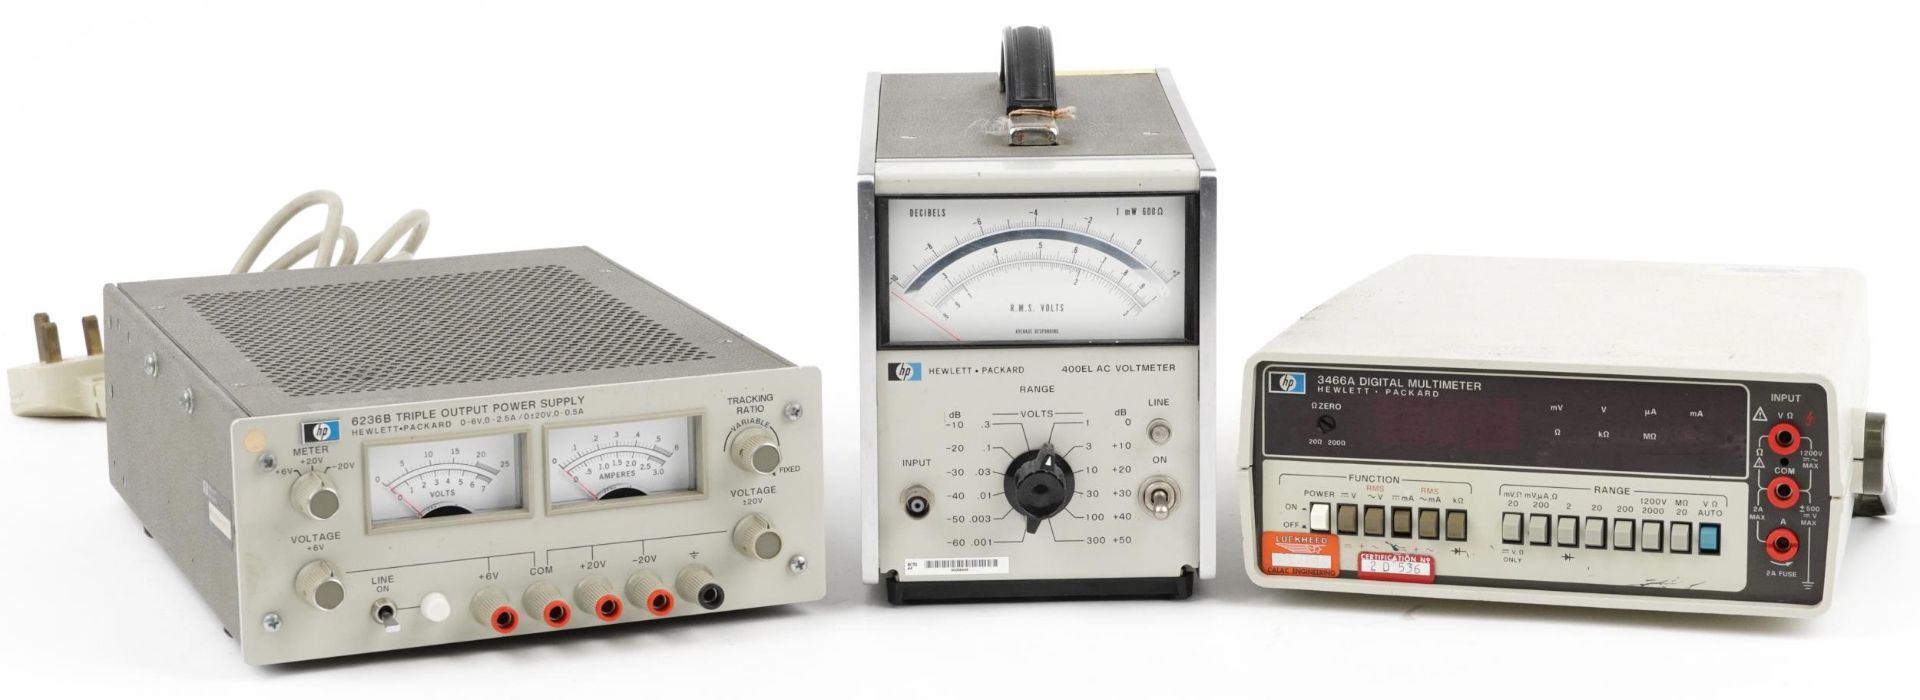 Vintage Hewlett Packard electrical power supplies and multi-meters comprising 6236B triple output